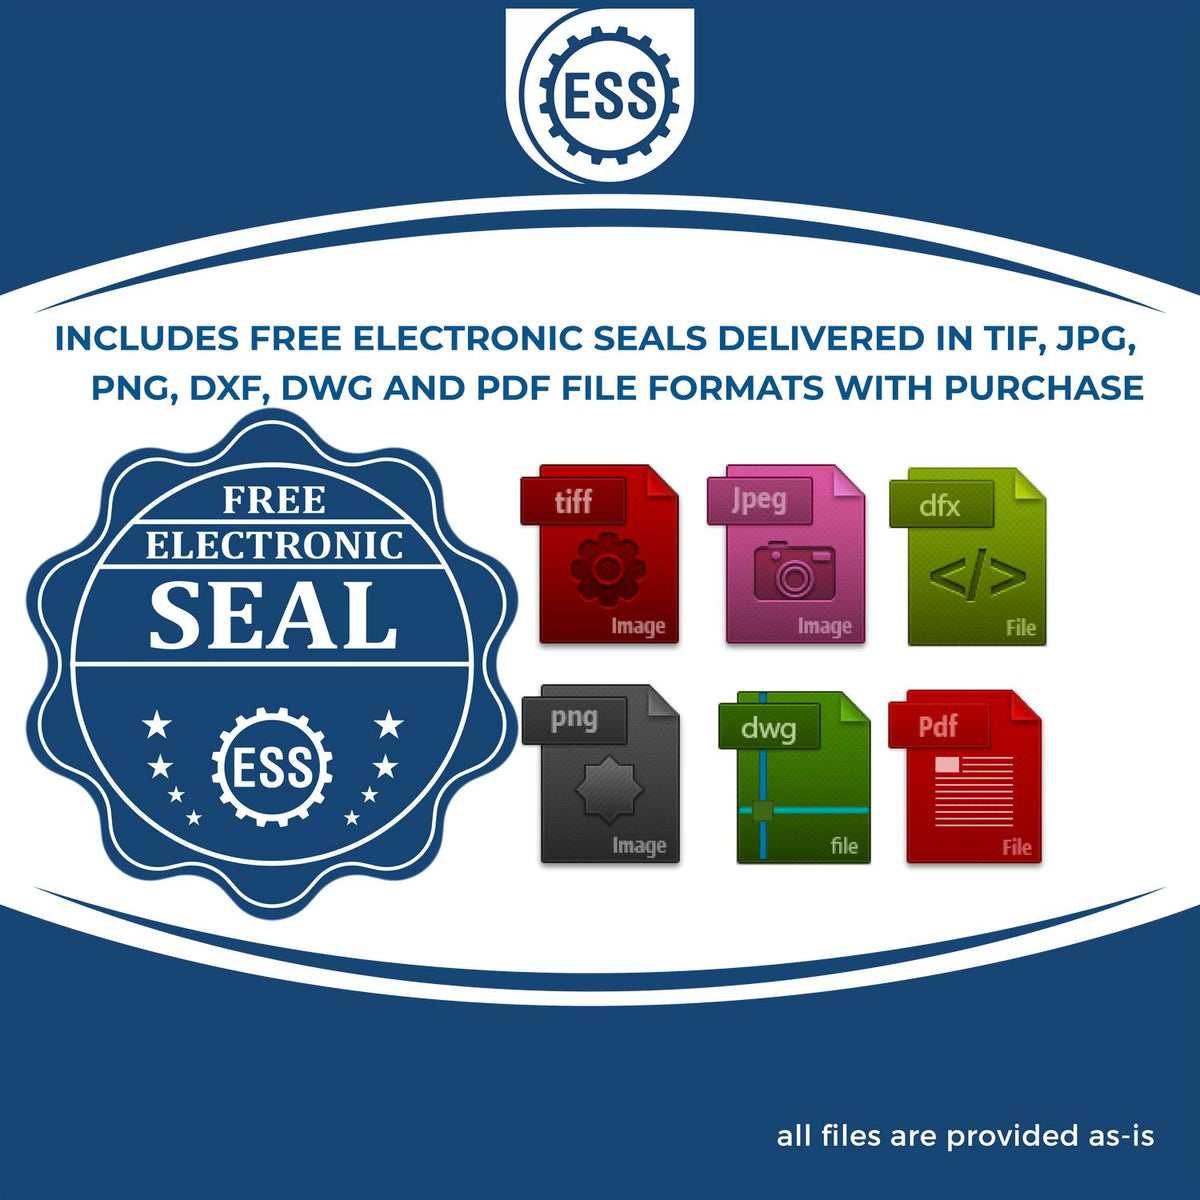 An infographic for the free electronic seal for the Self-Inking Guam PE Stamp illustrating the different file type icons such as DXF, DWG, TIF, JPG and PNG.